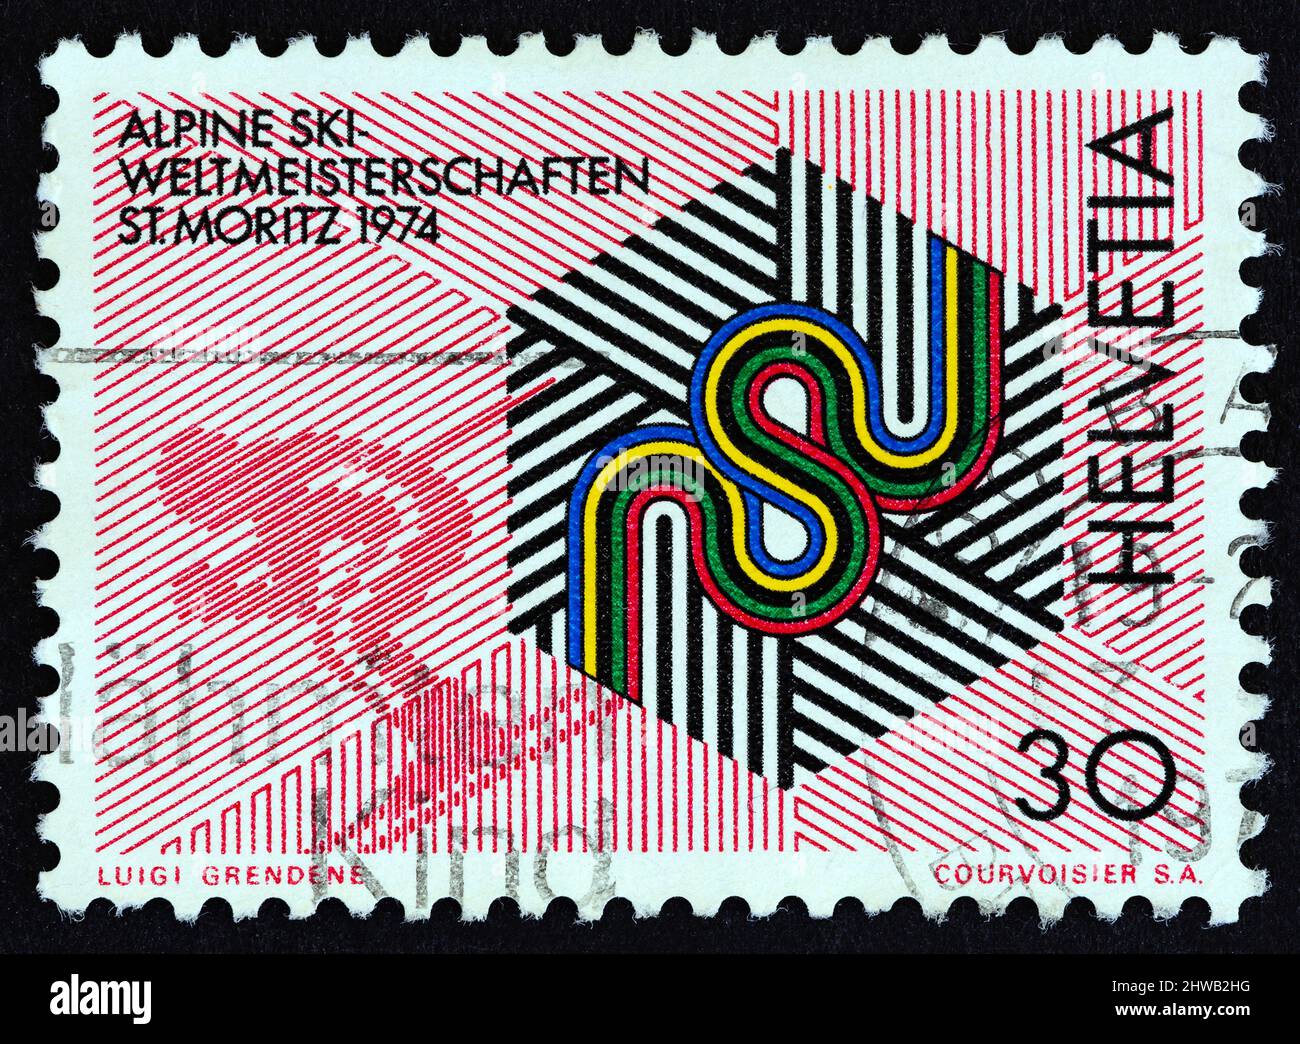 SWITZERLAND - CIRCA 1973: A stamp printed in Switzerland issued for the World Alpine Skiing Championships, St. Moritz 1974, shows skiing emblem. Stock Photo